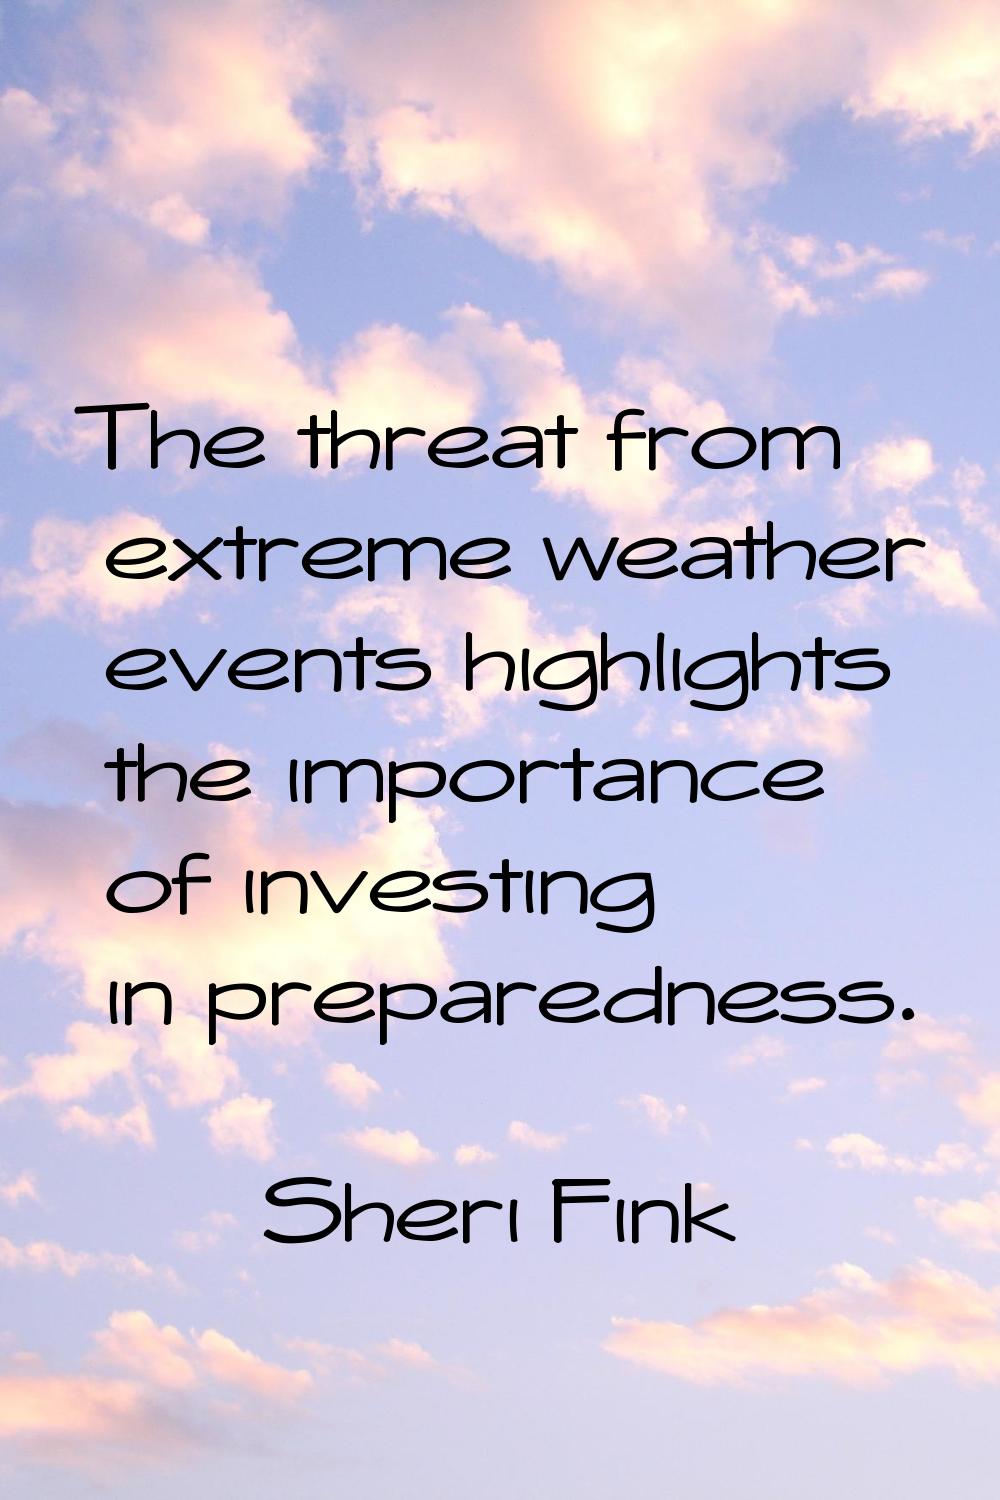 The threat from extreme weather events highlights the importance of investing in preparedness.